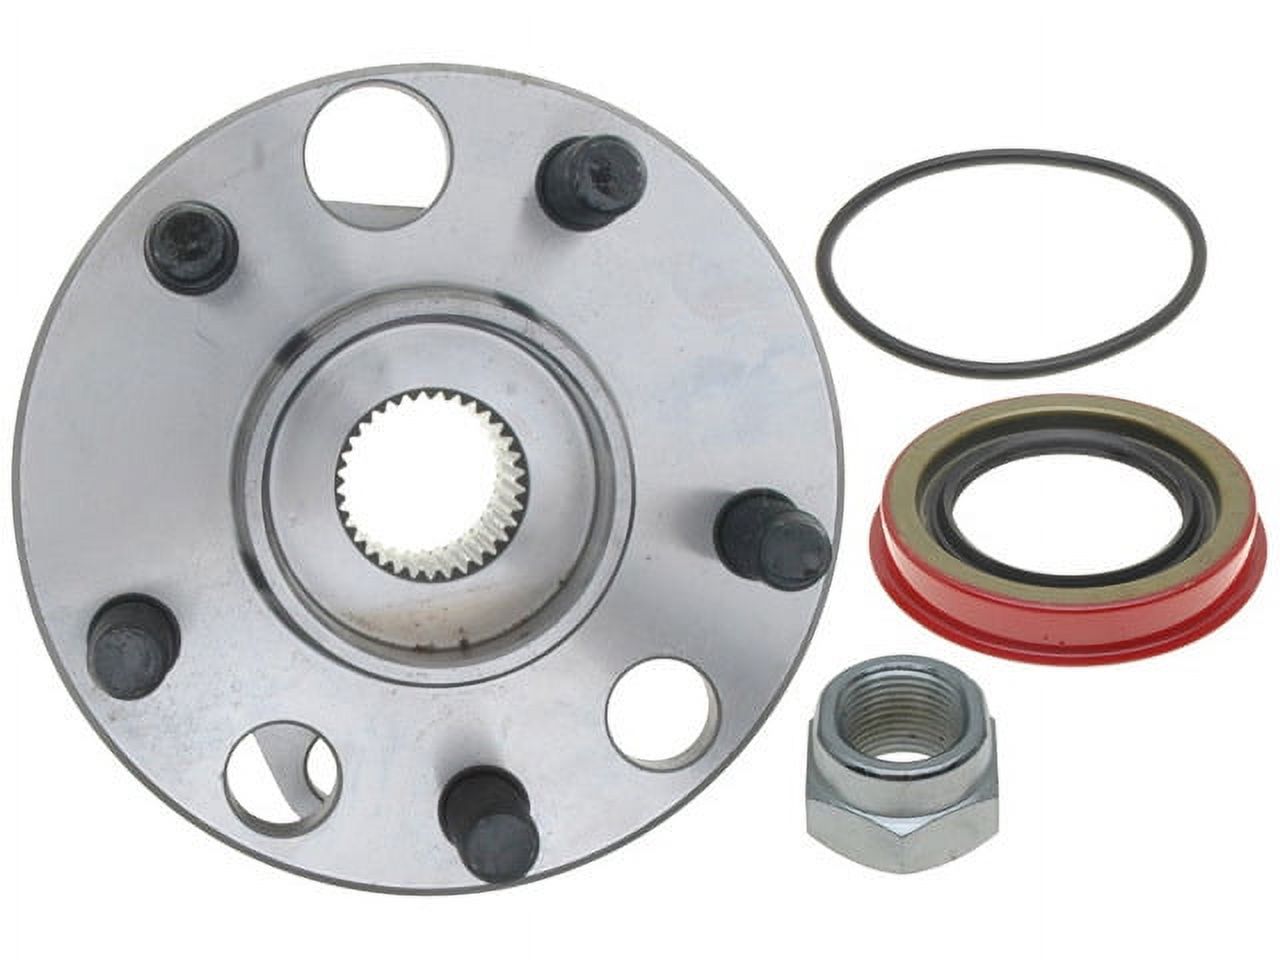 Raybestos Brakes Axle Bearing and Hub Assembly Repair Kit P/N:713017K Fits select: 1984-2005 CHEVROLET CAVALIER, 1995-2005 PONTIAC SUNFIRE - image 2 of 5